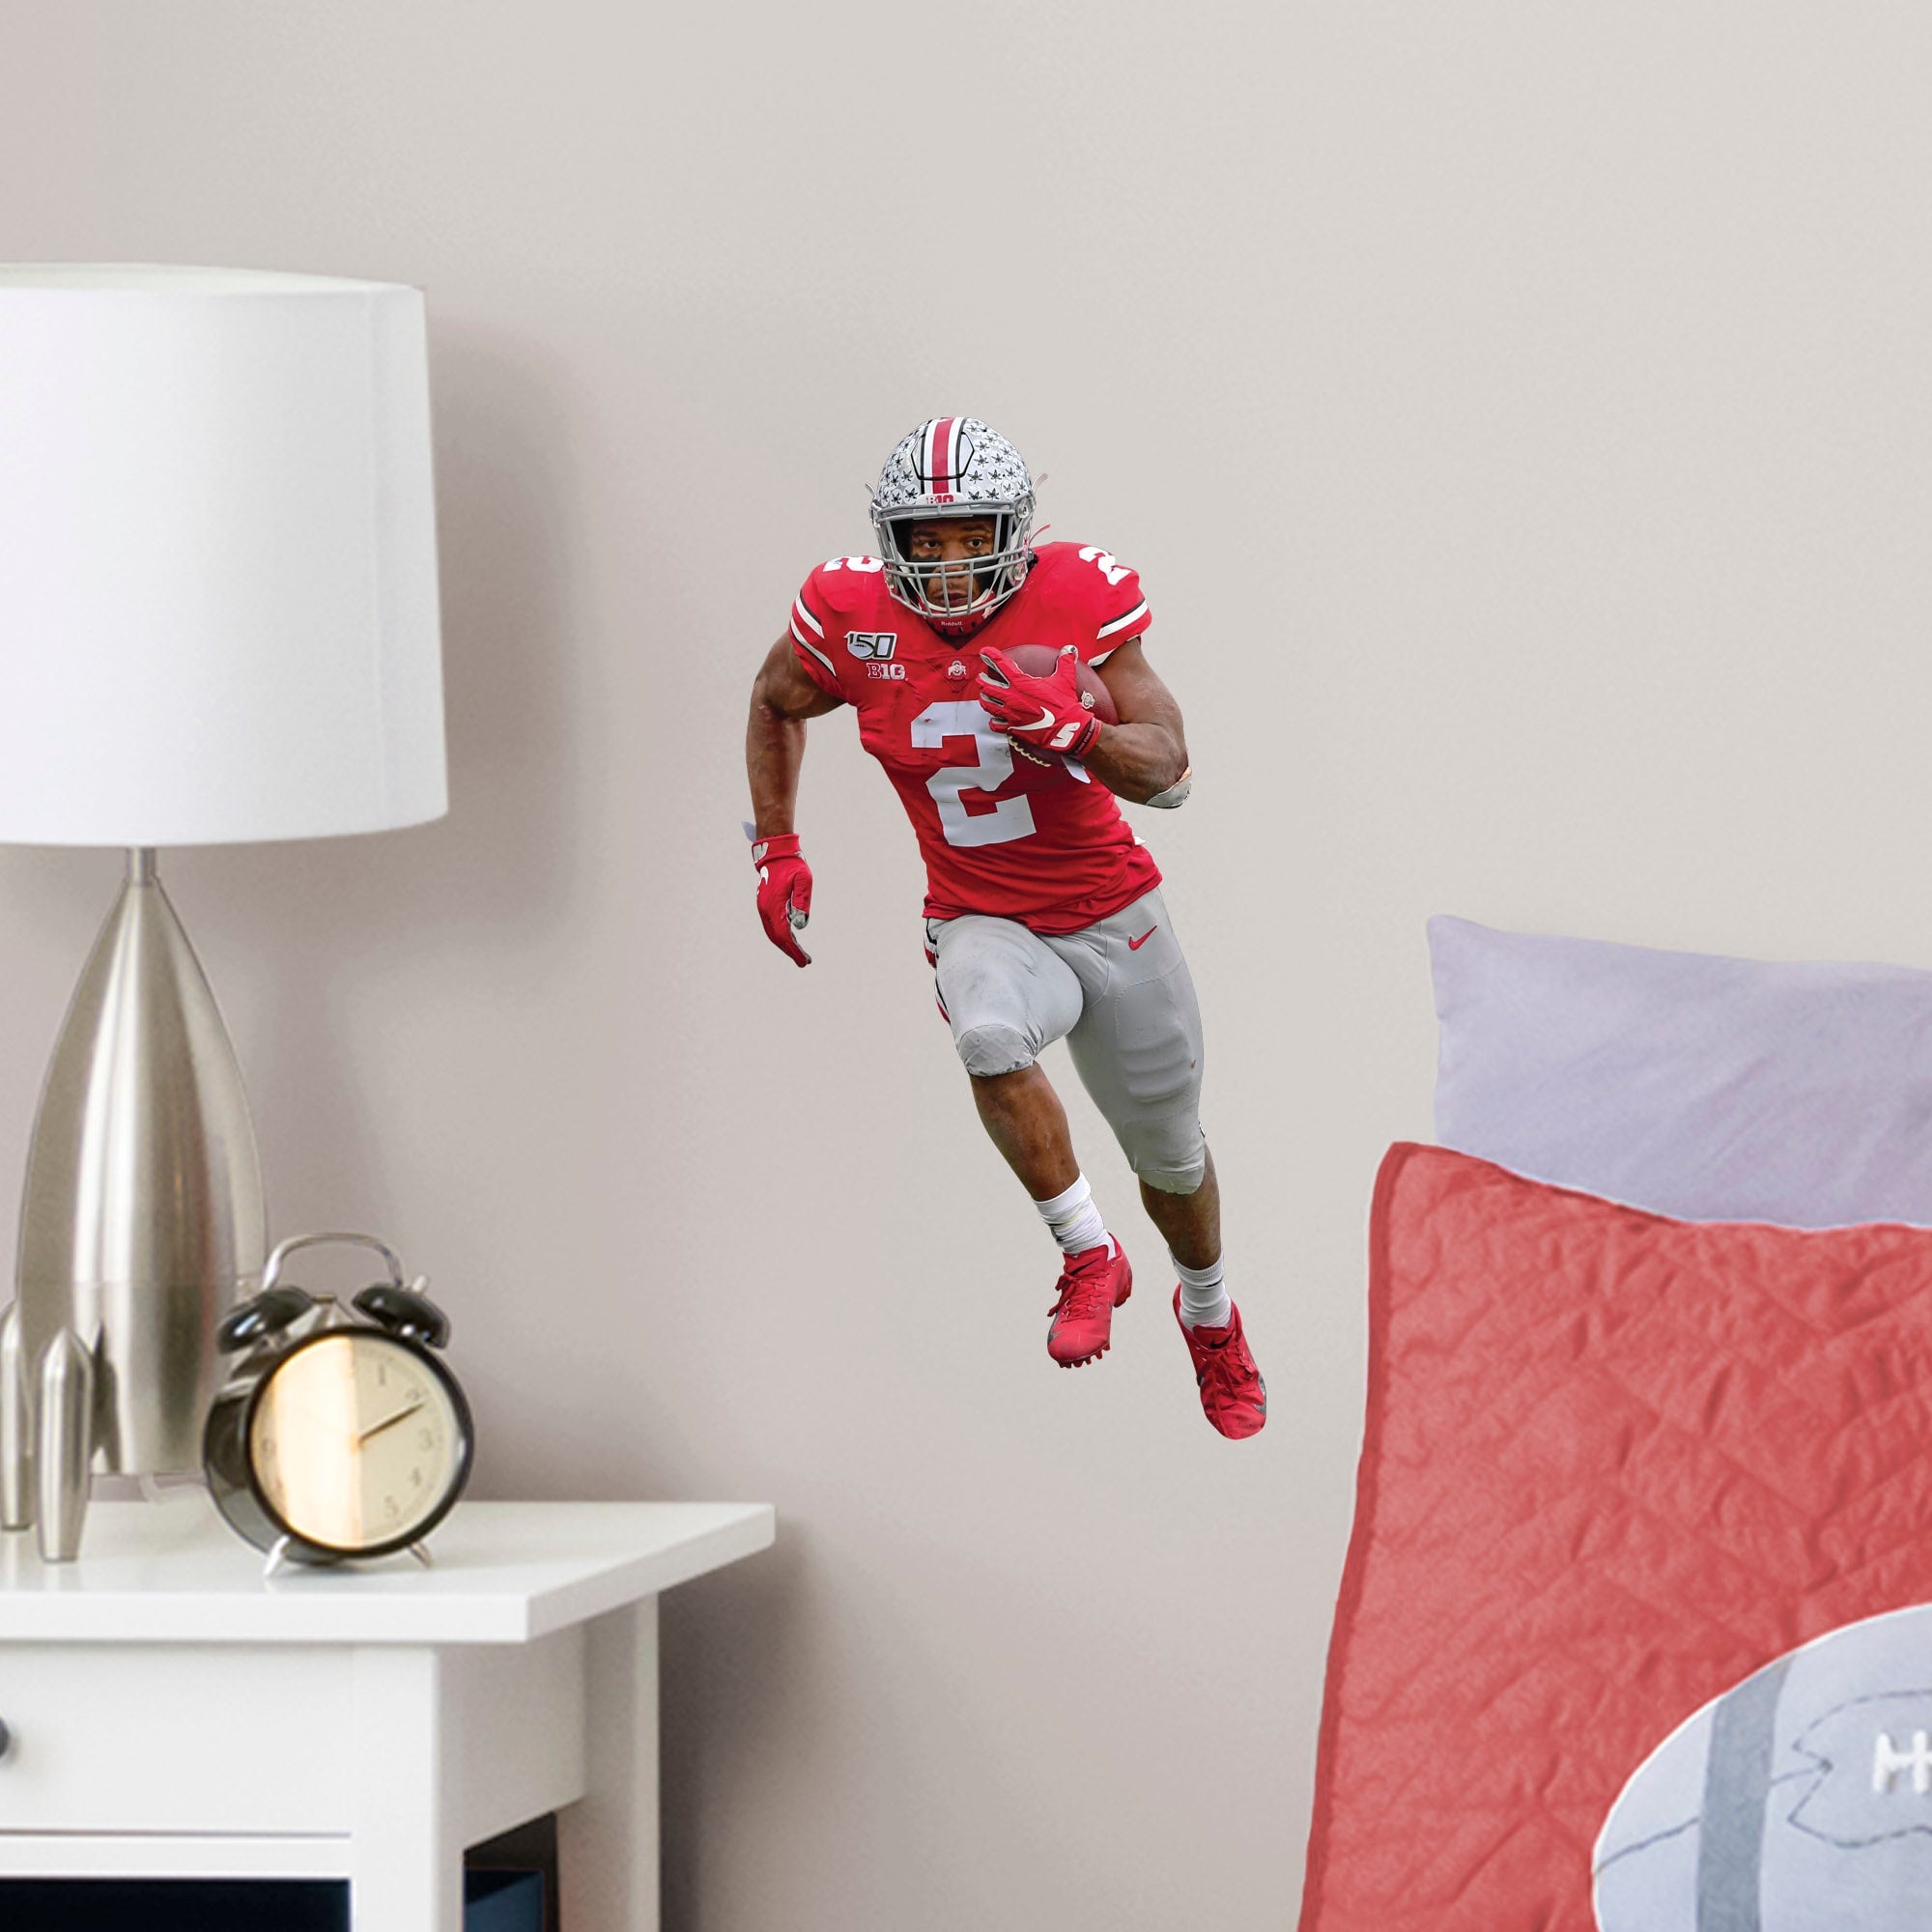 J.K. Dobbins for Ohio State Buckeyes: Ohio State - Officially Licensed Removable Wall Decal Large by Fathead | Vinyl